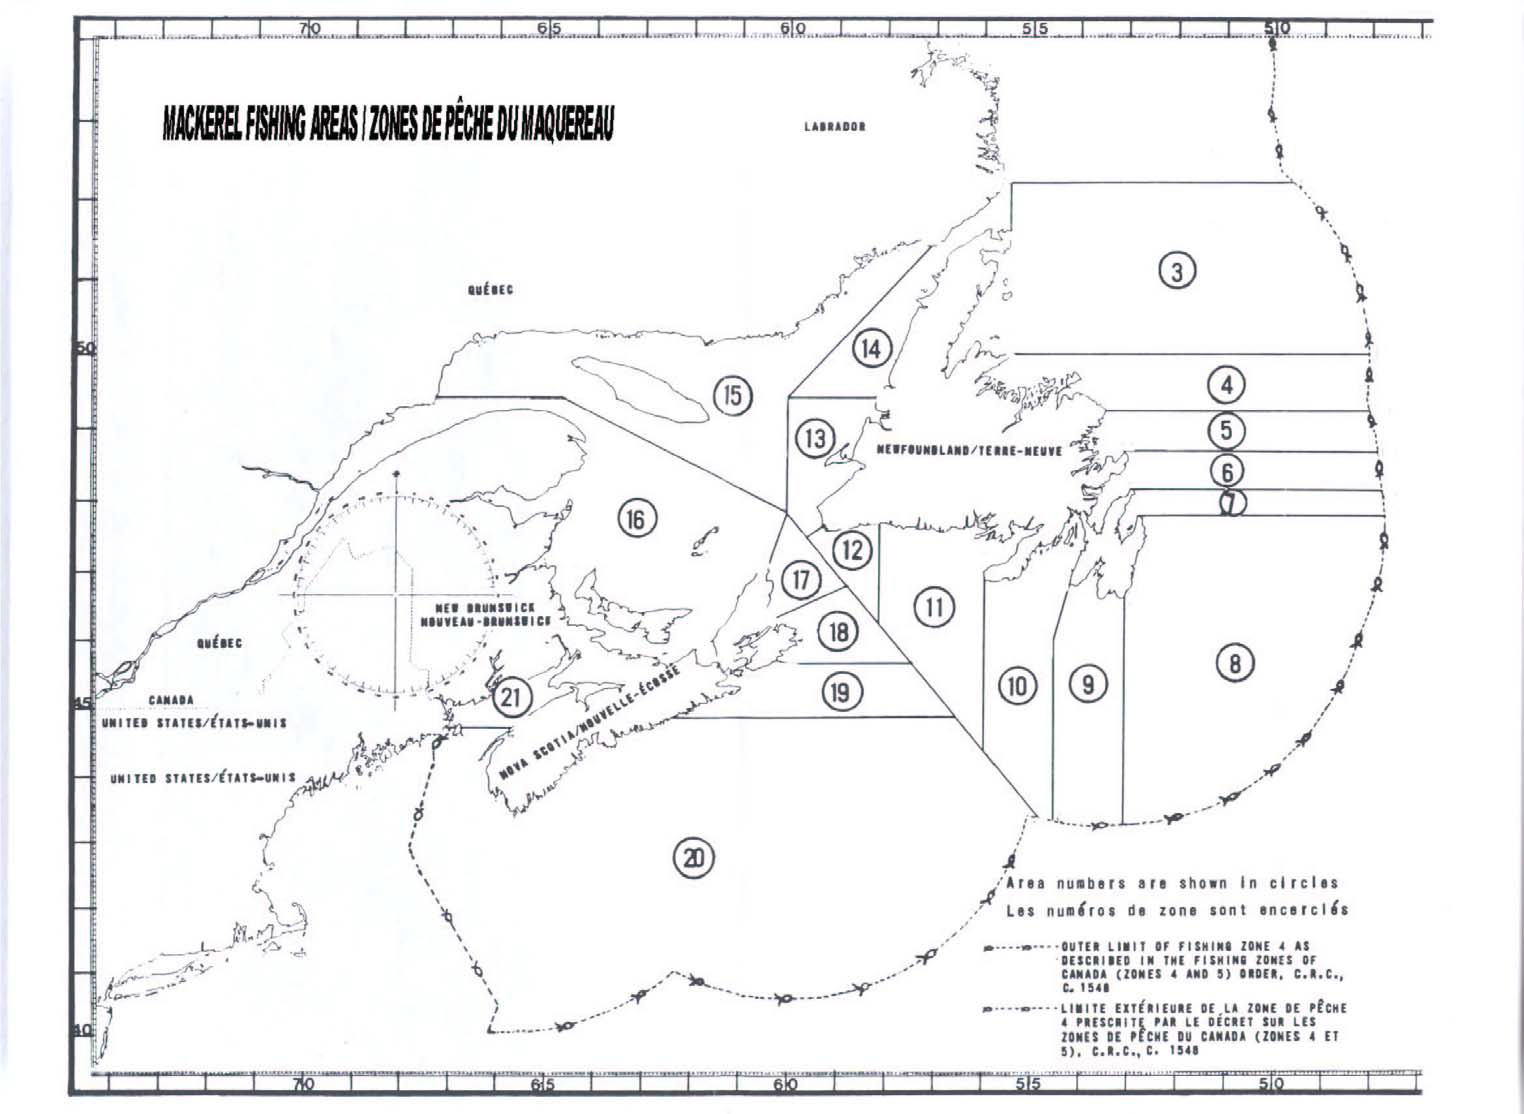 Outlines the boundaries for the mackerel fishing areas on Canada’s east coast.